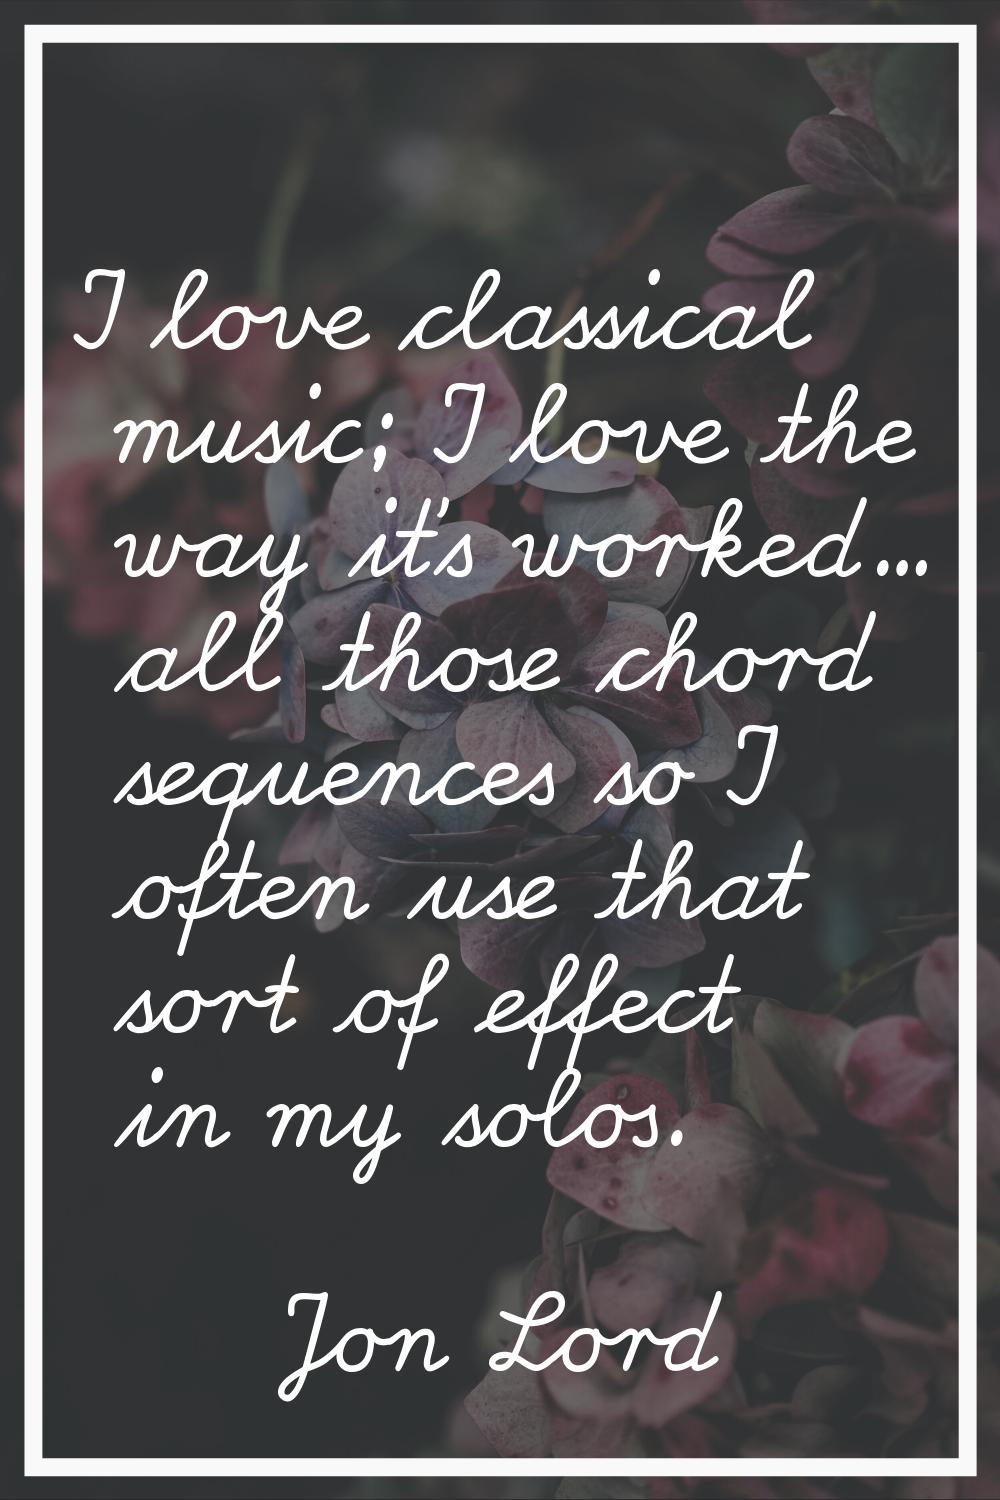 I love classical music; I love the way it's worked... all those chord sequences so I often use that